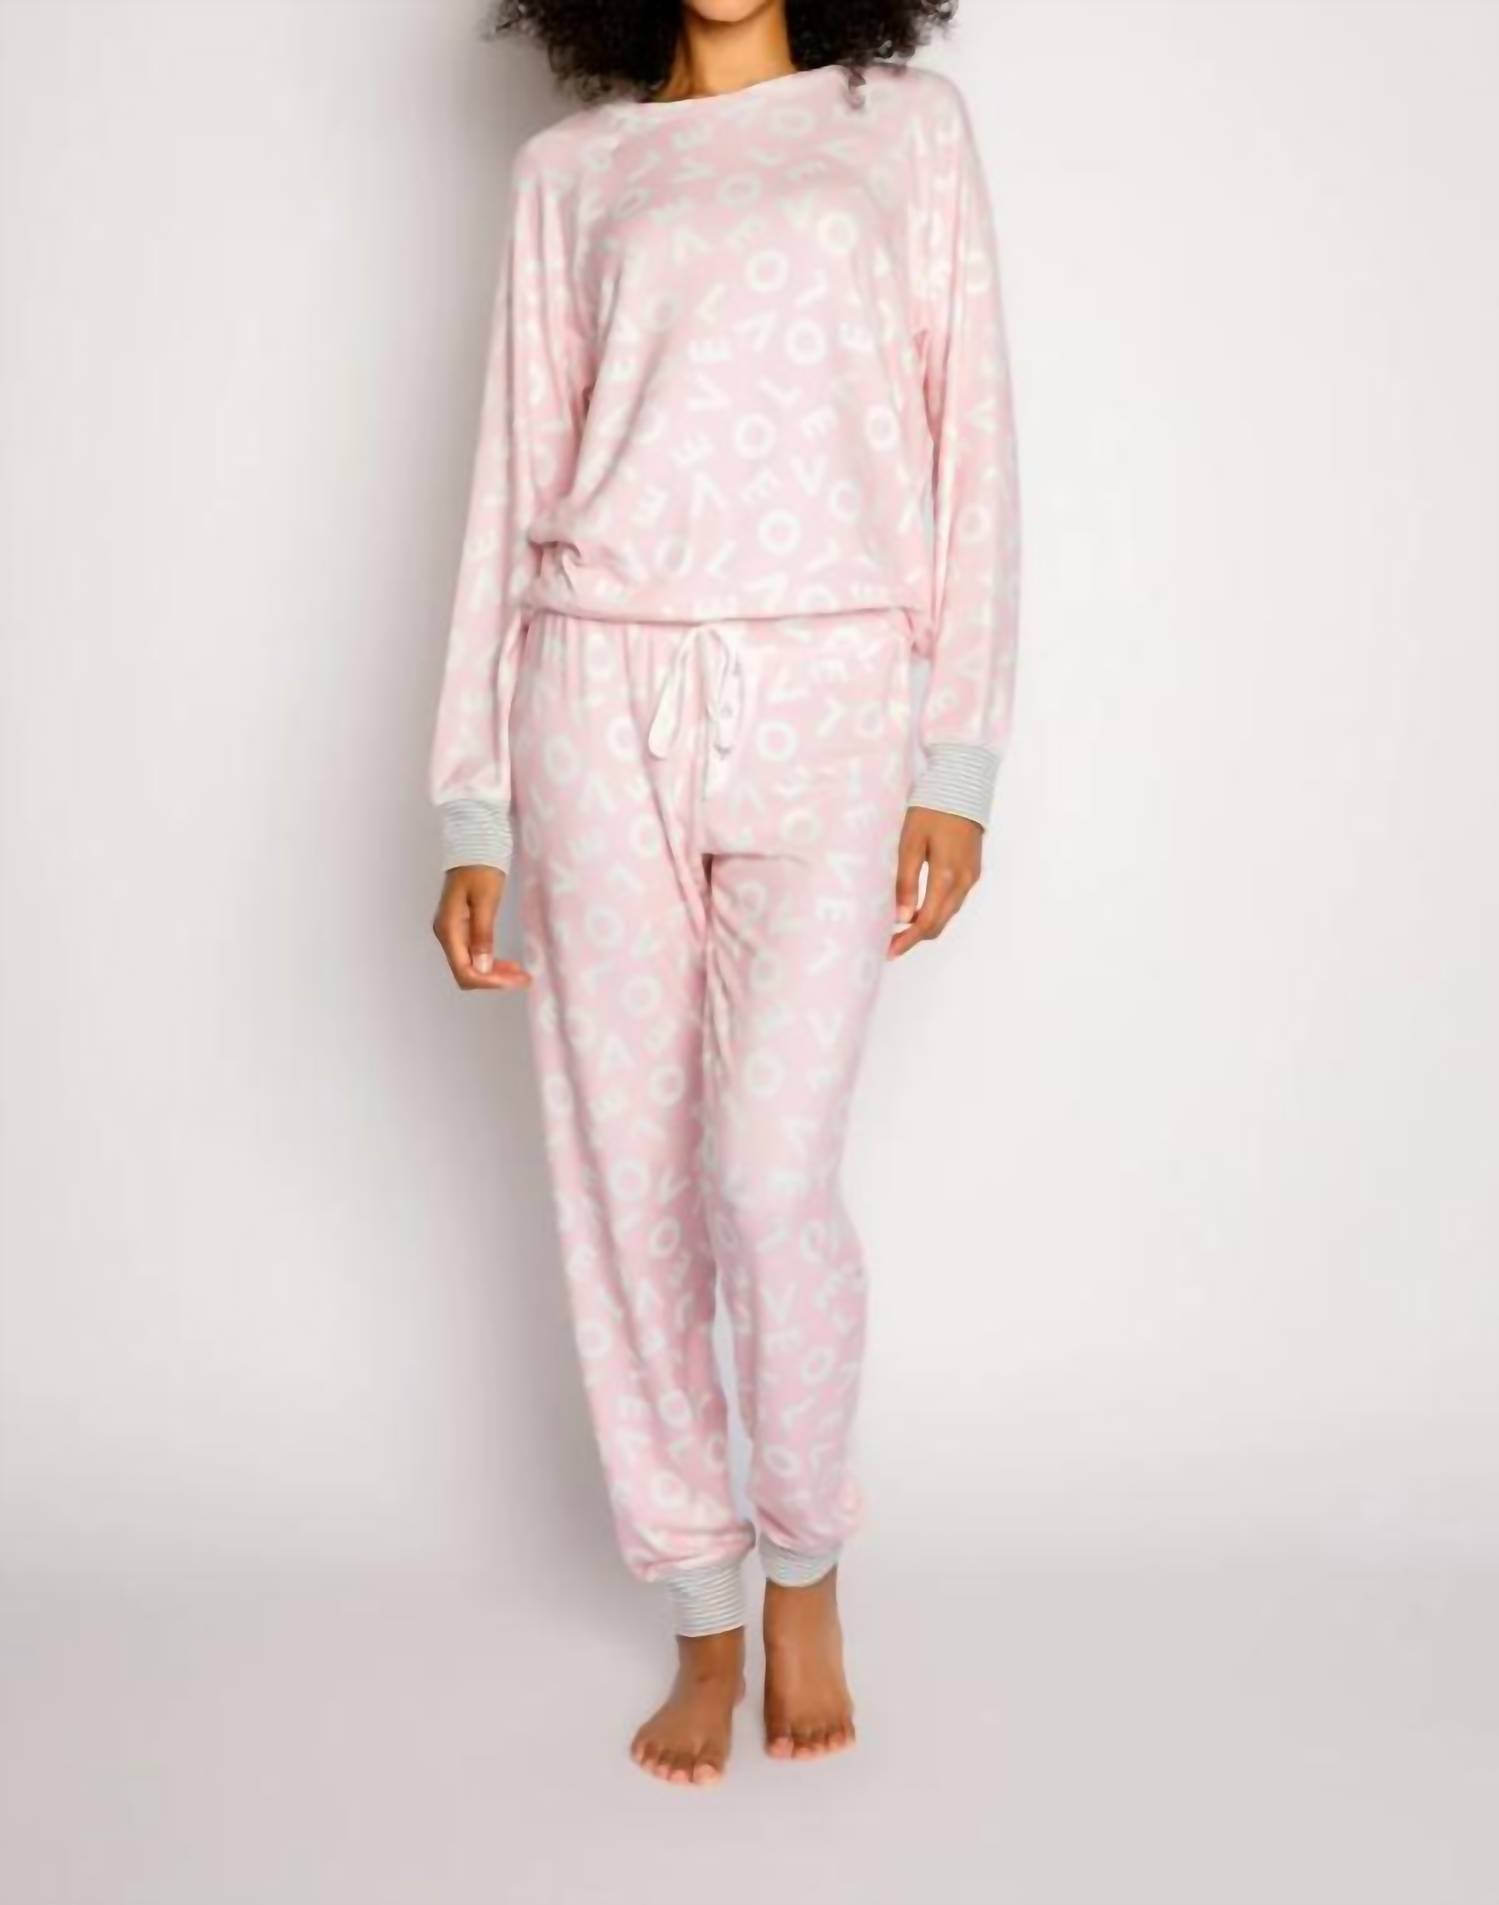 Pj Salvage Live Life Gratefully Jam Pant In Pink Dream In Neutral